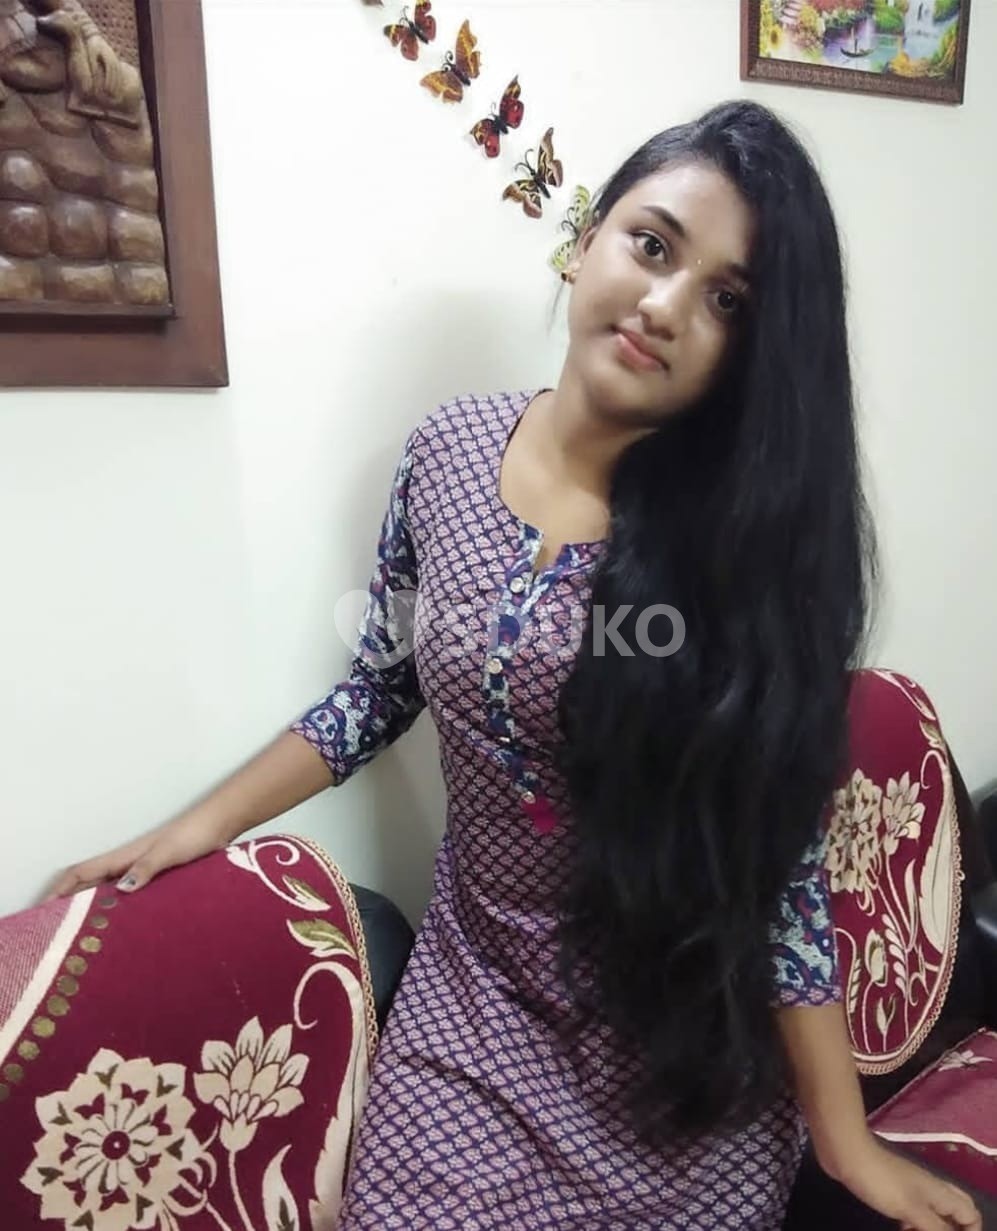 Salem gys afortable price outcall incall independent service book